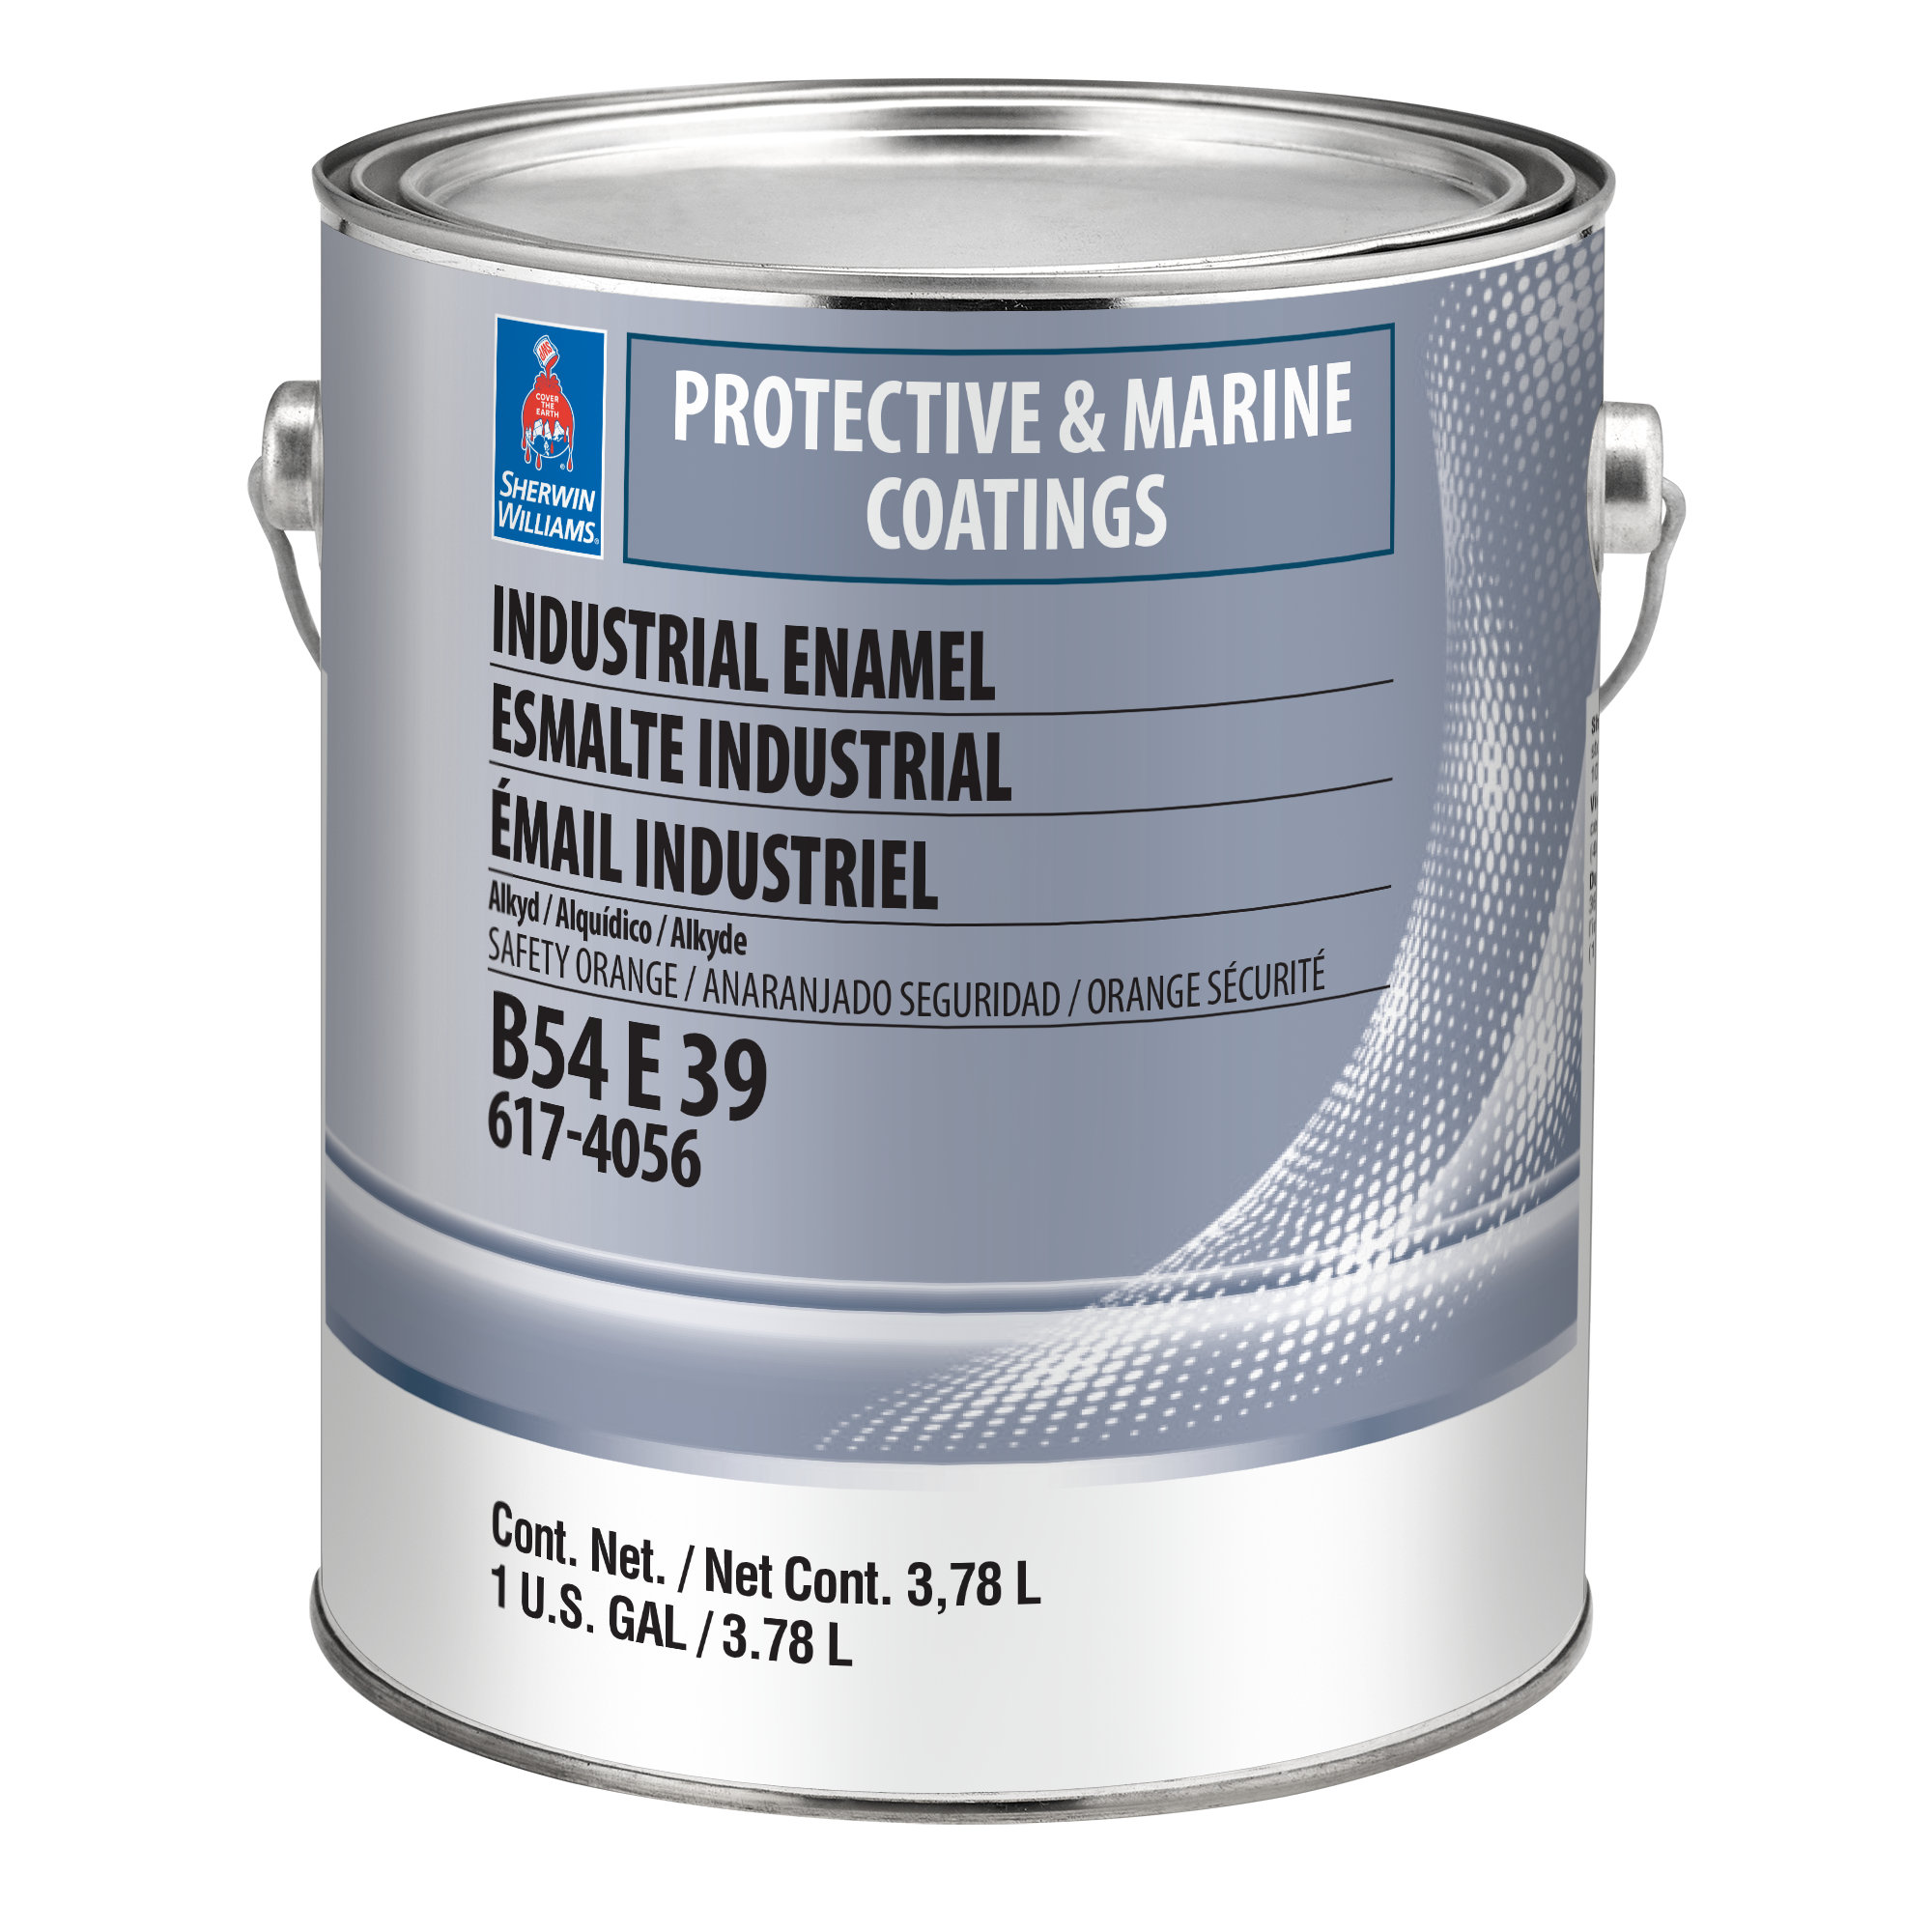 Enamel Paint for Metal: How to Apply Enamel Paint on Metals?